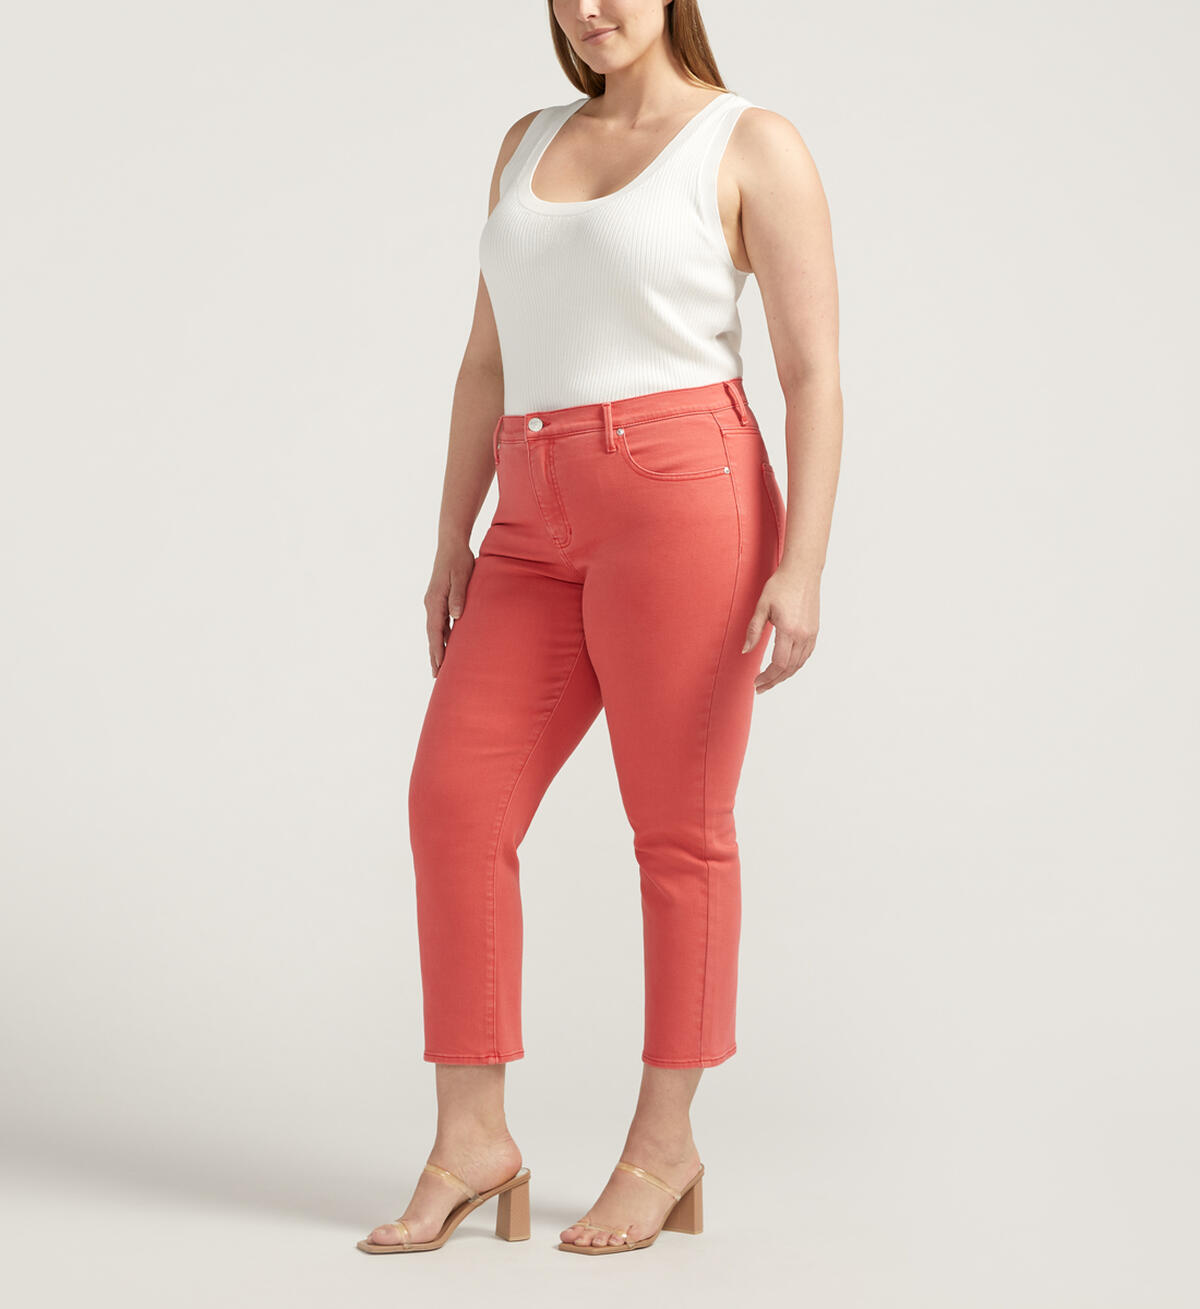 Cassie Mid Rise Cropped Pants Plus Size, , hi-res image number 2